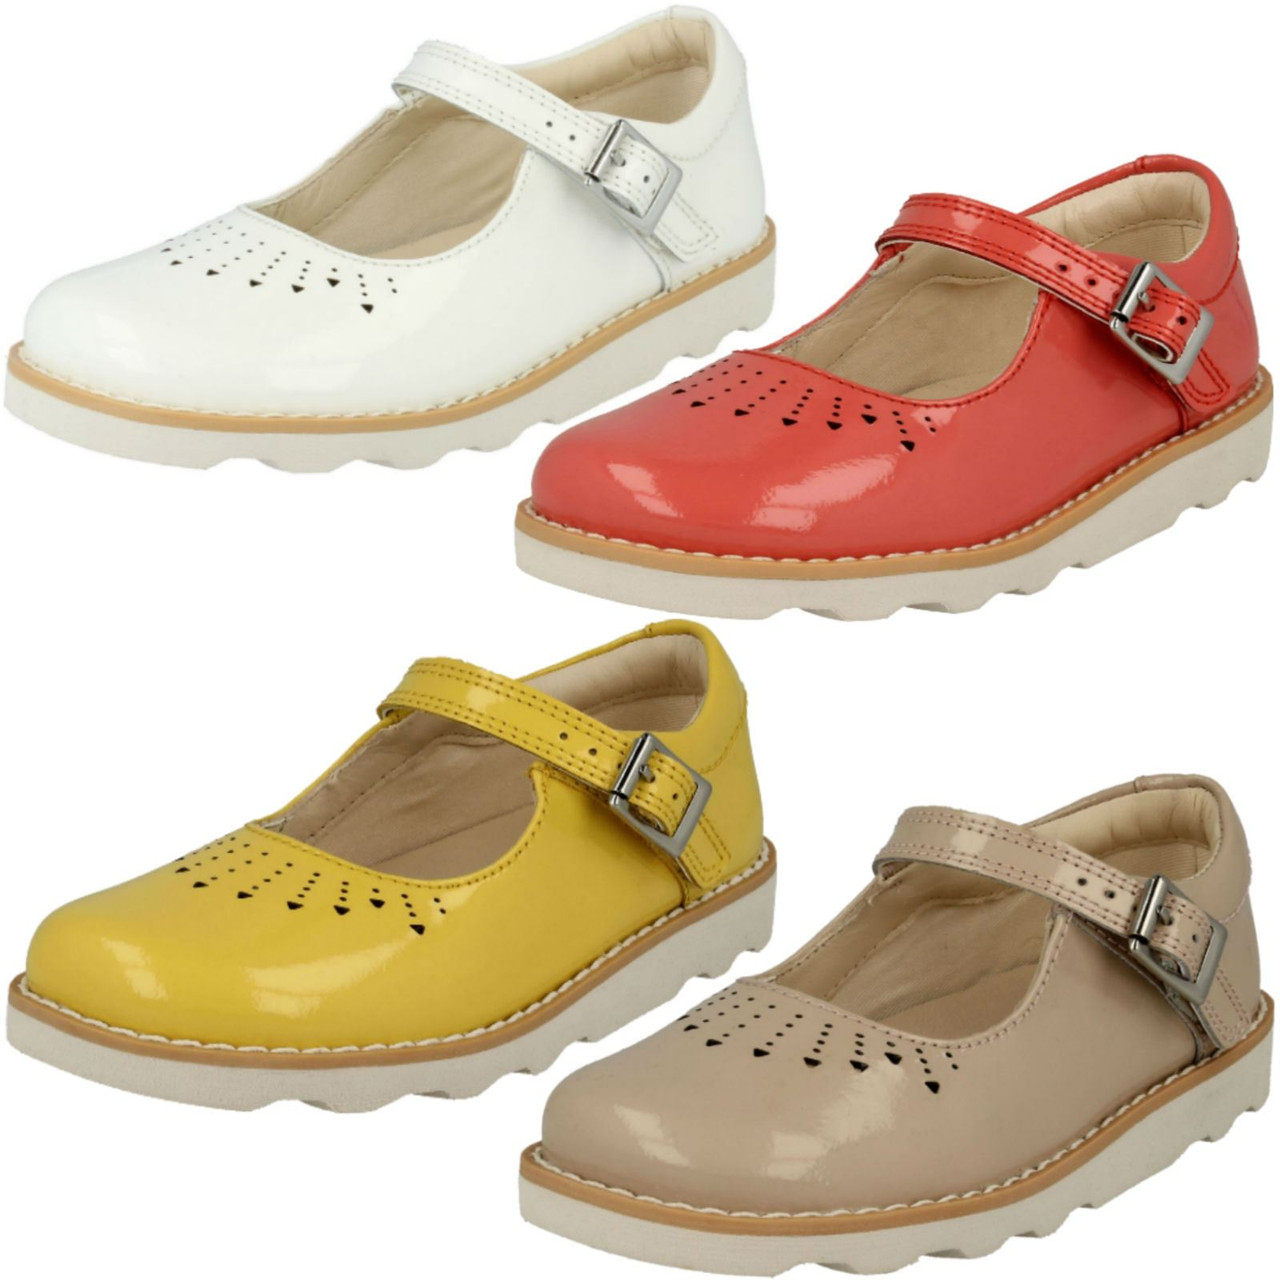 clarks jump shoes